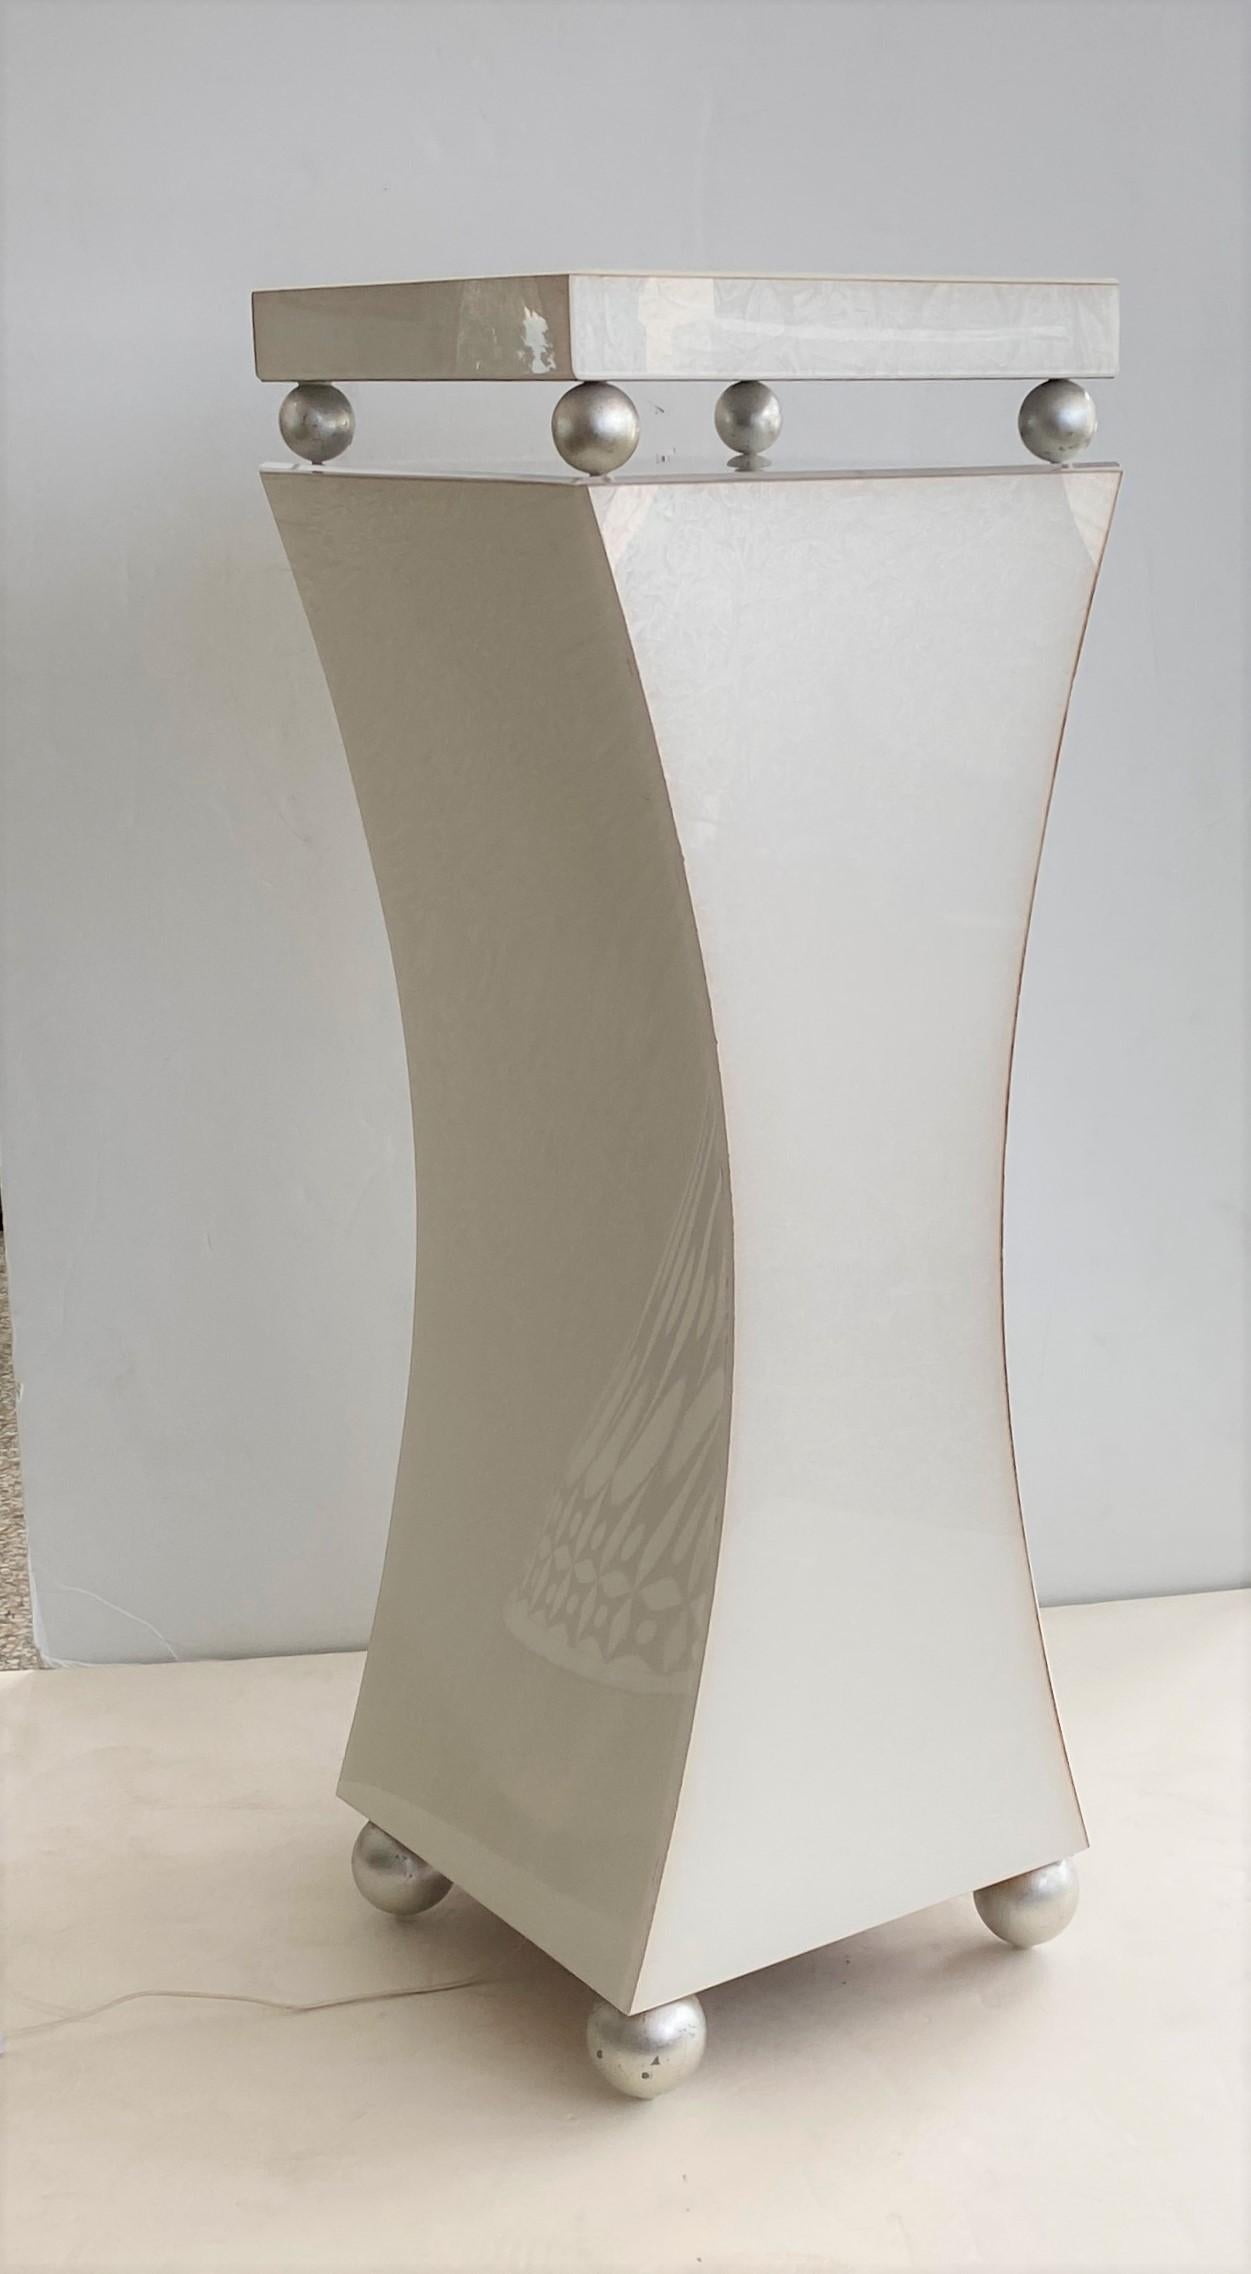 Art Deco Style Illuminated Pedestal In Good Condition For Sale In West Palm Beach, FL